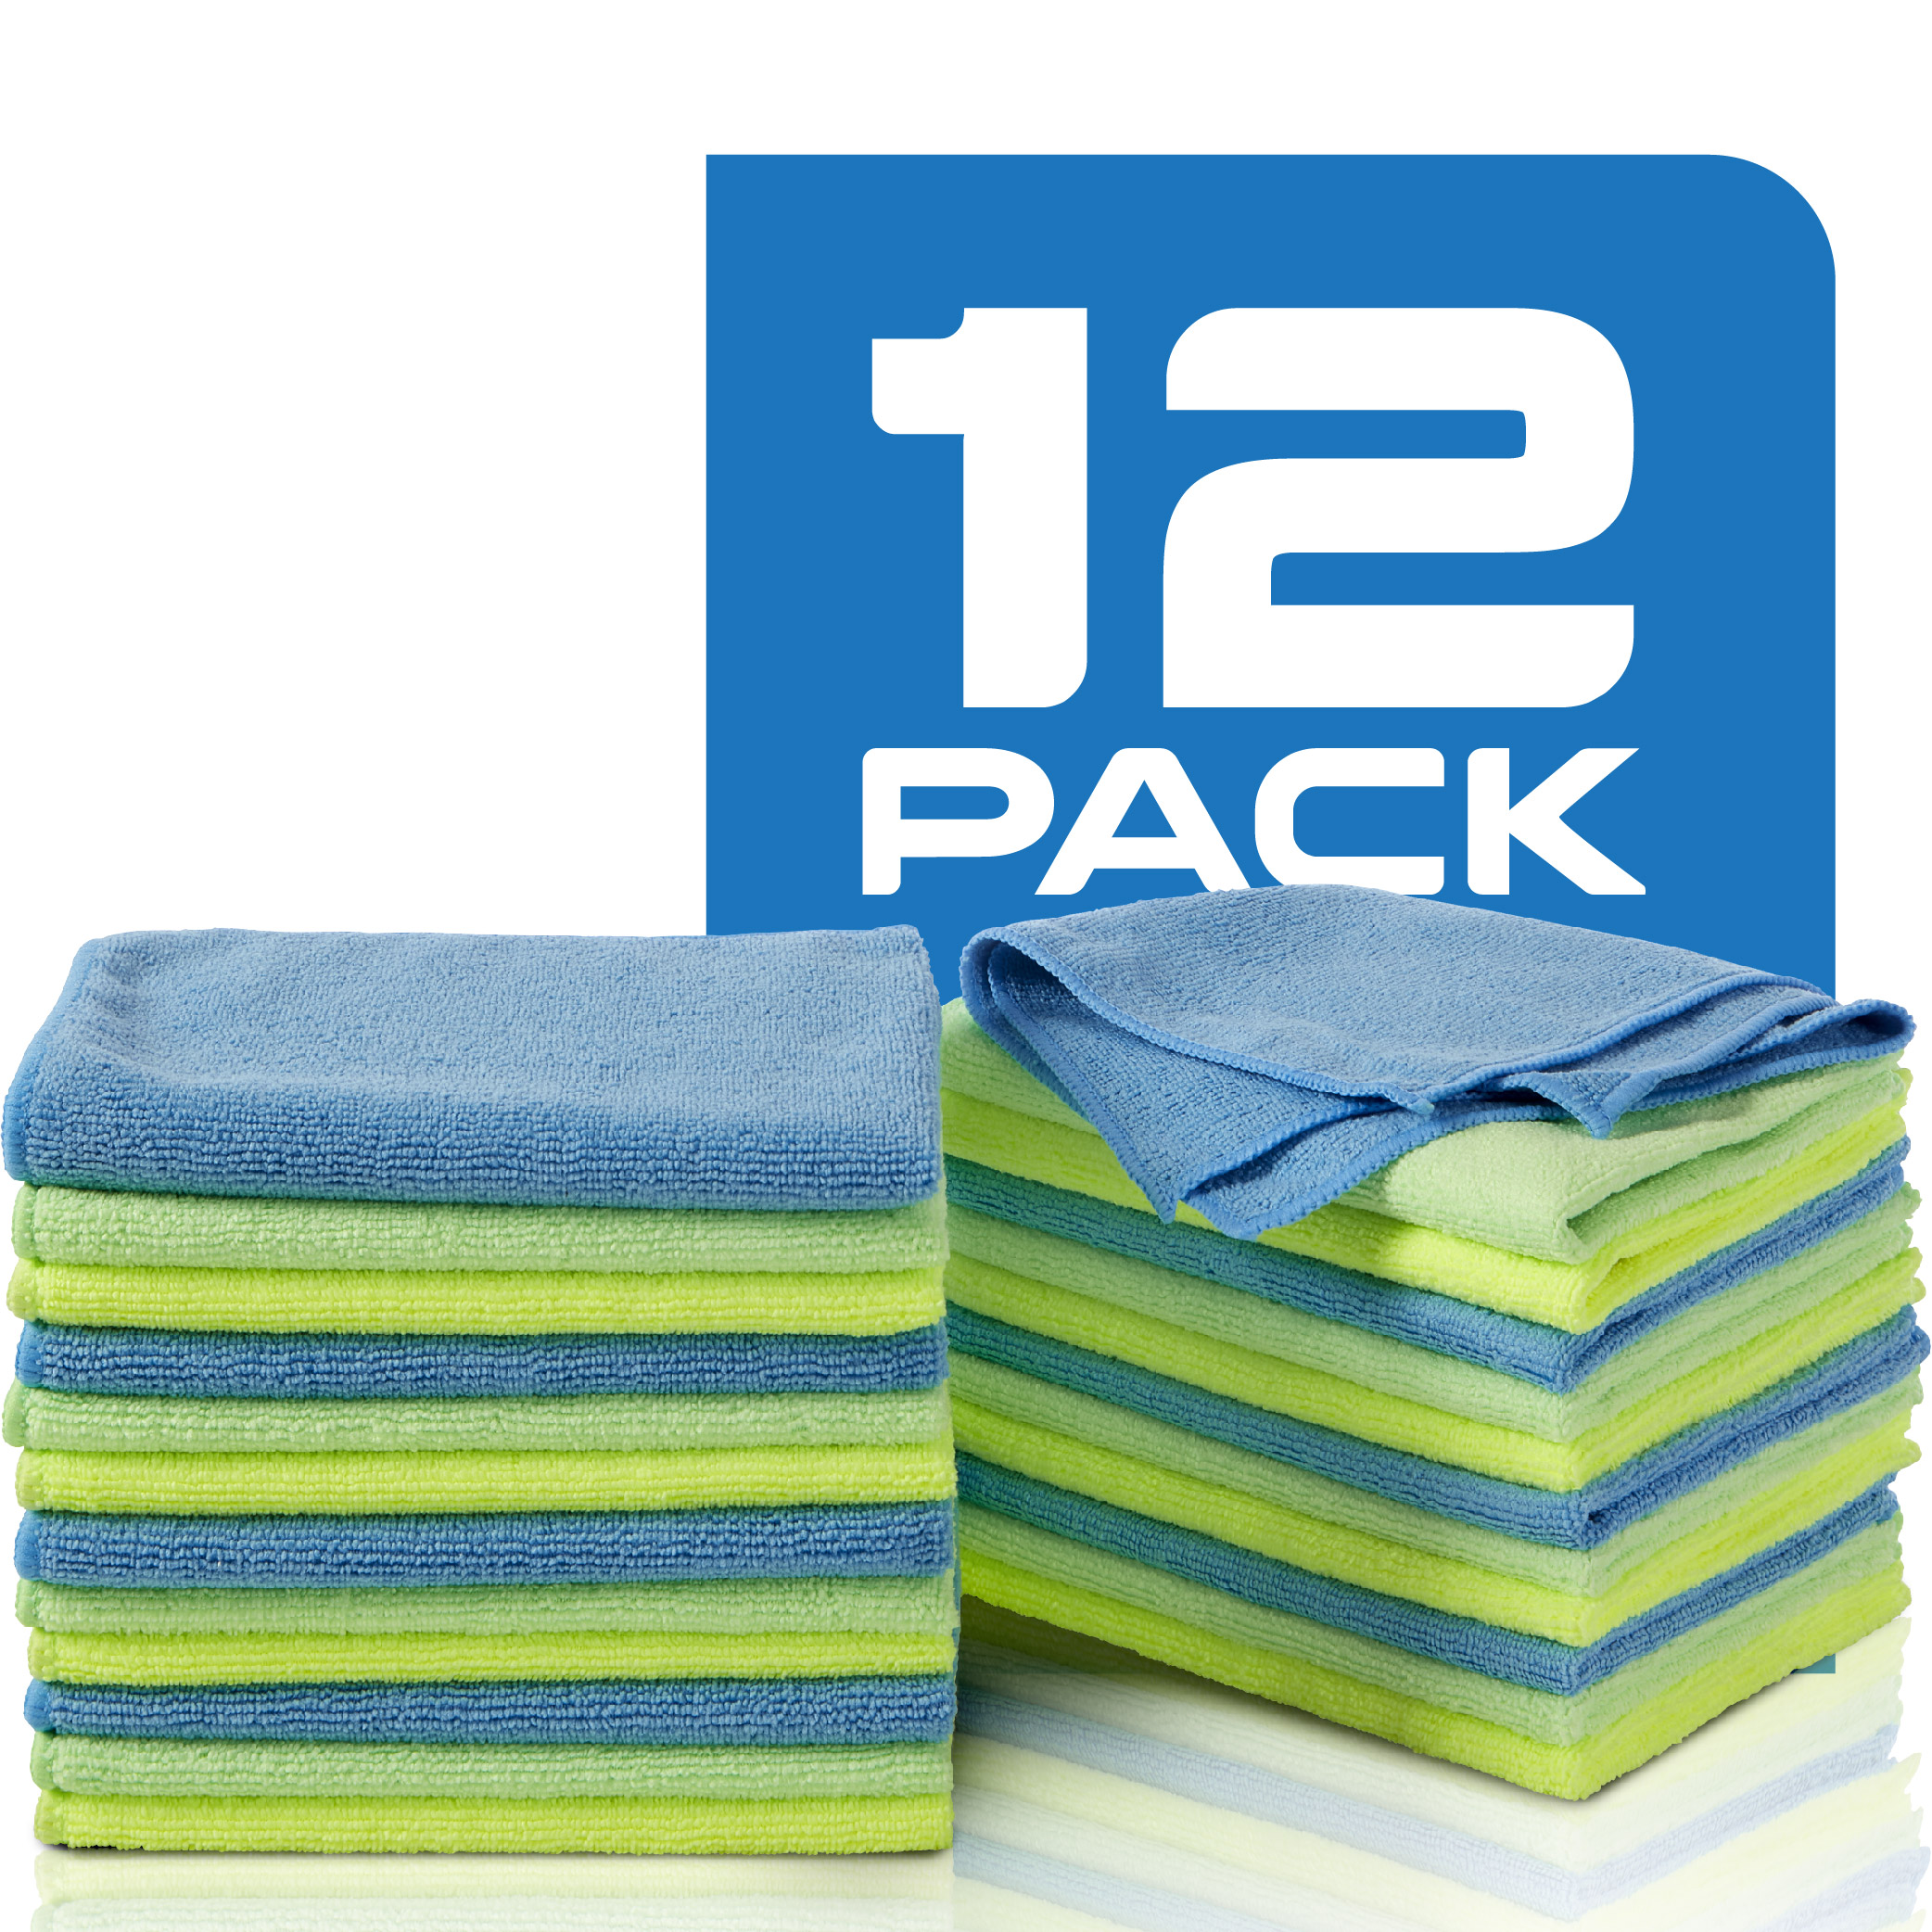 Zwipes Microfiber Cleaning Cloths, Multicolor, 12 Pack - image 1 of 13